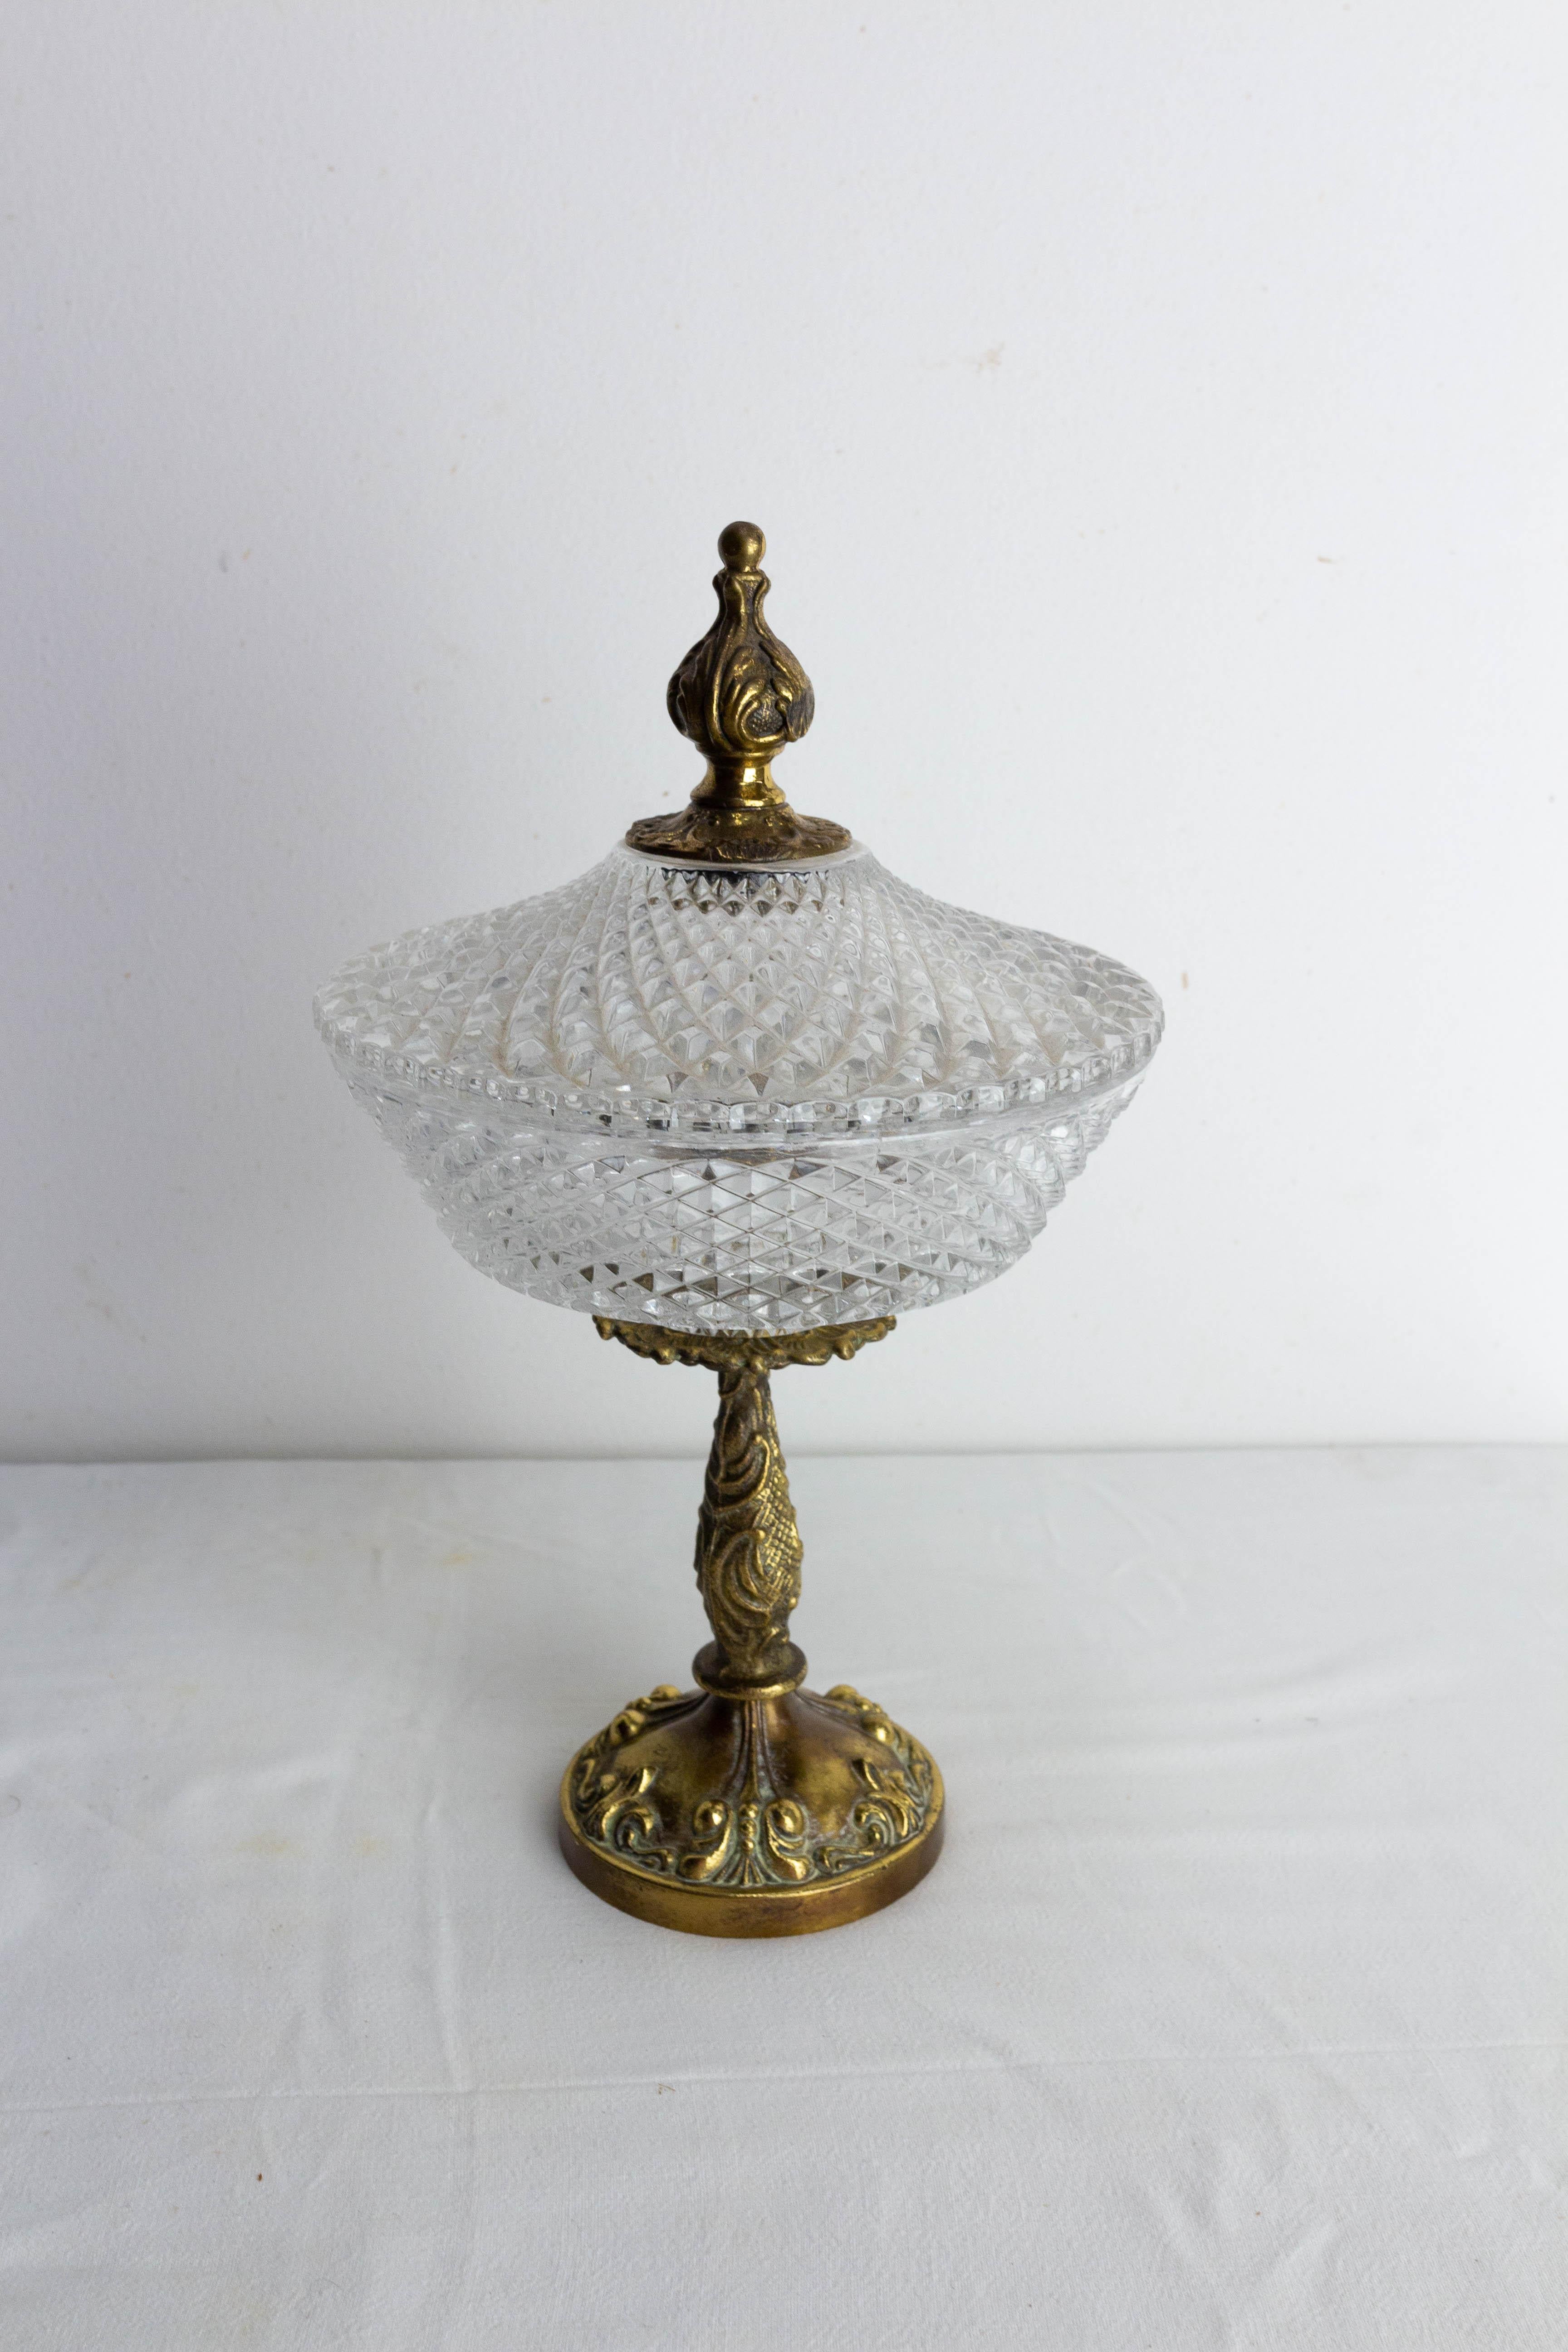 Atypical center piece or vide-poche made in the 1960s with a candlestick. 
Vegetal ornementation
Brass and glass
French Mid-century
Good condition

Shipping:
D 16.5 H 29 1,7 kg.

